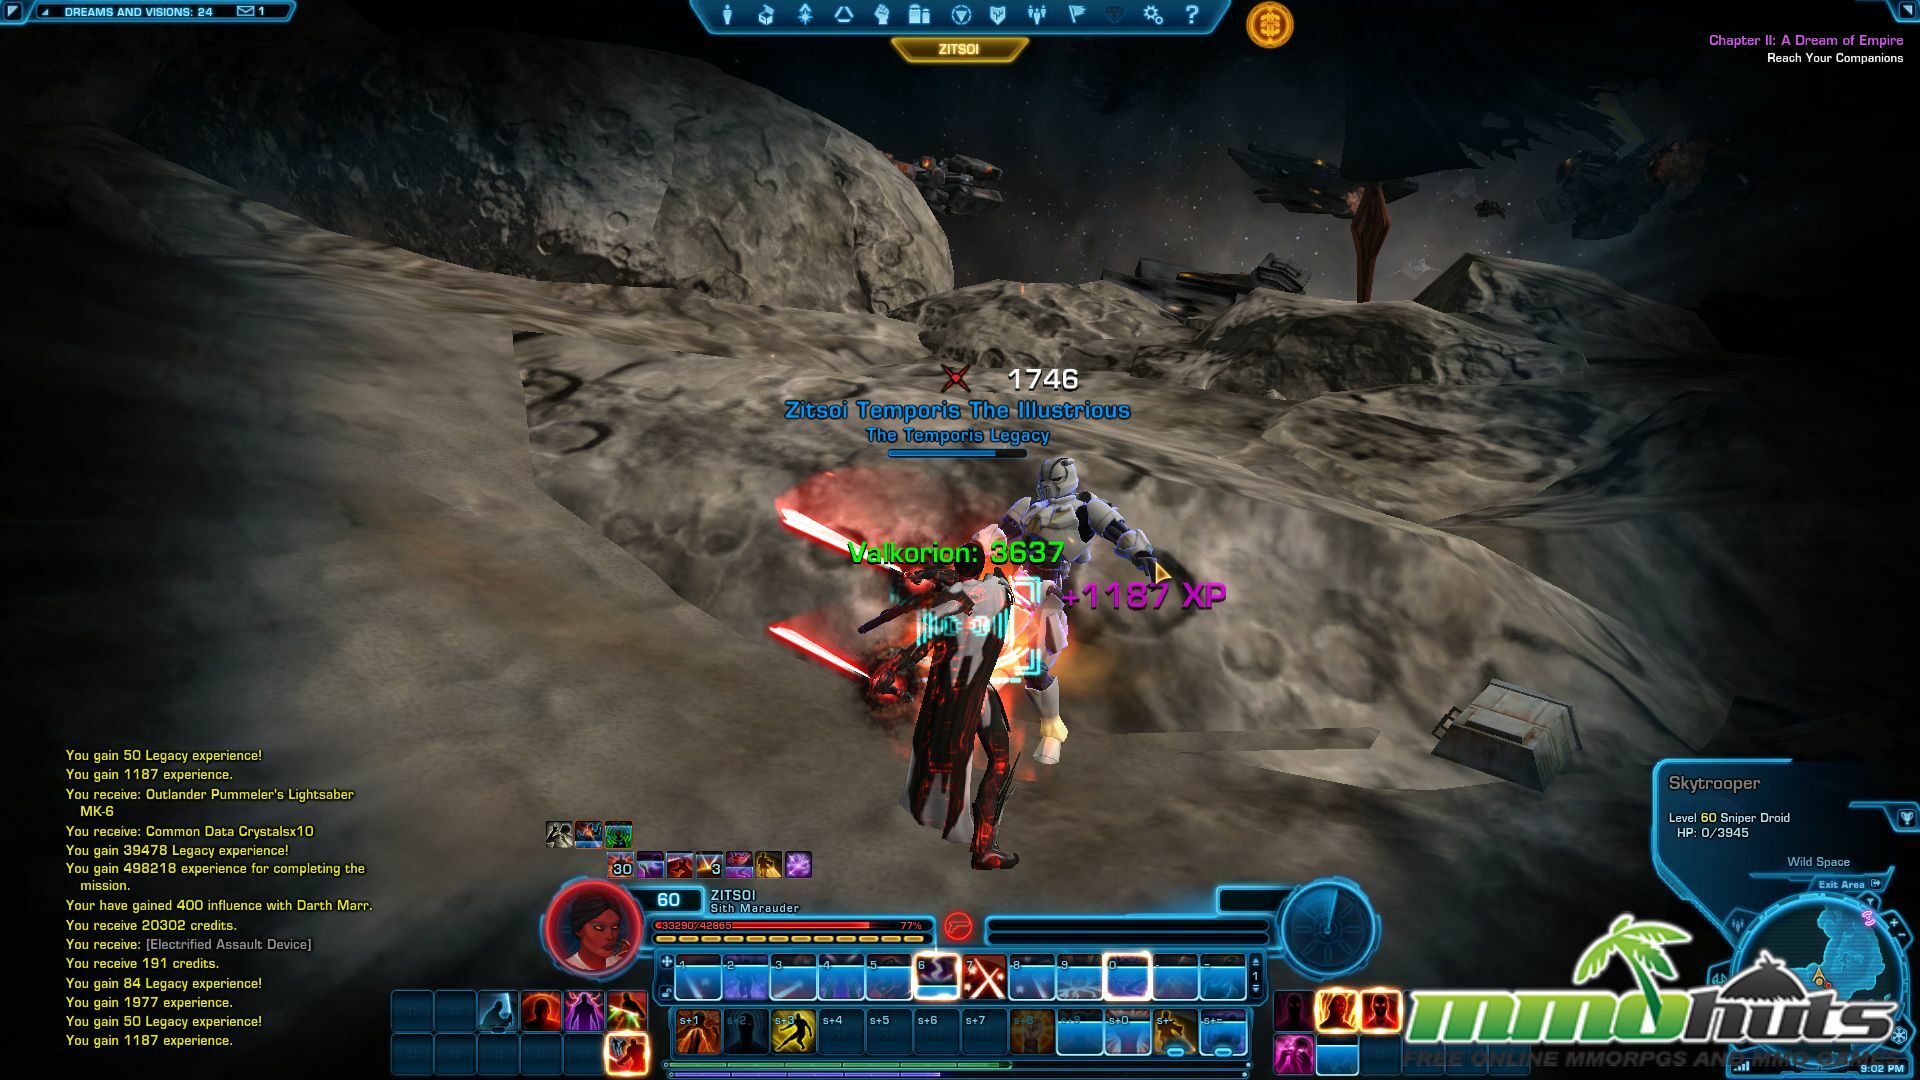 SWTOR: Knights of the Fallen Empire Review